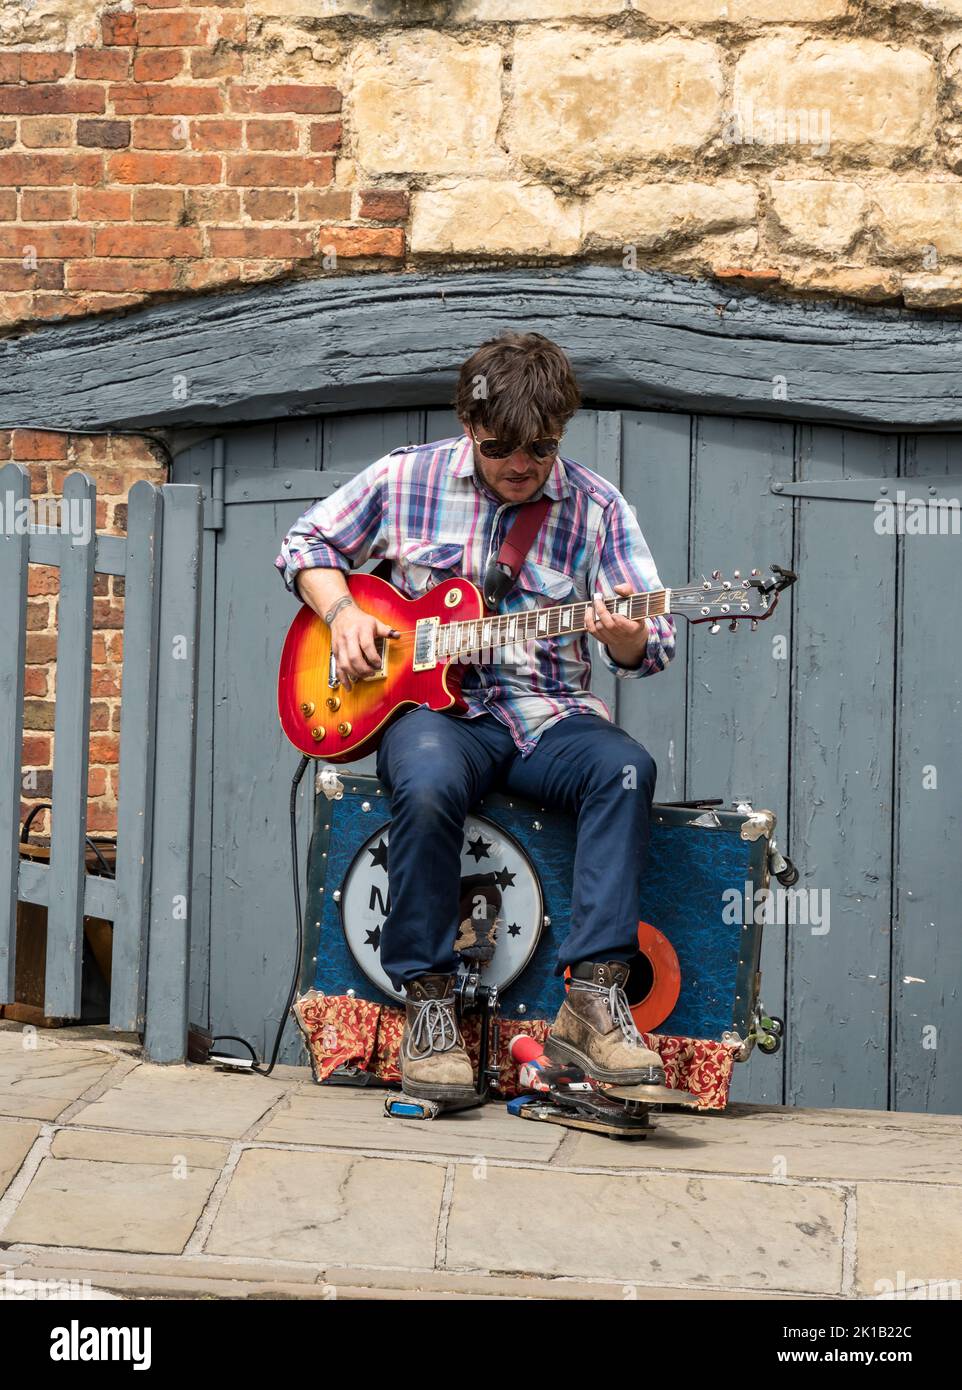 Busker playing electric guitar with other instrument self accompaniment Stock Photo